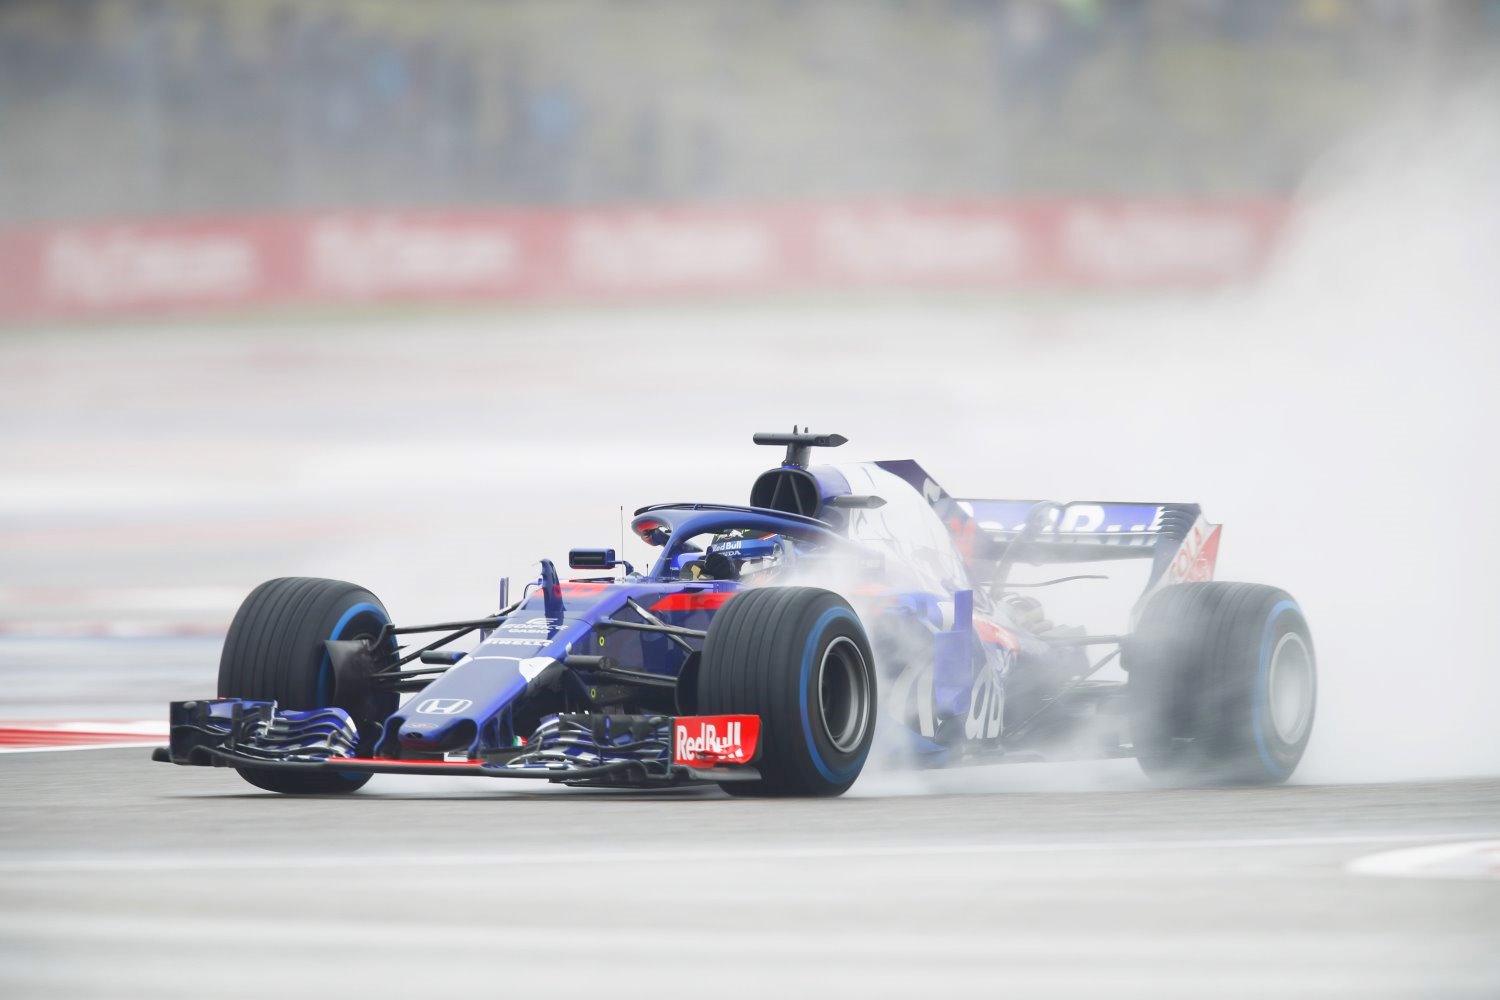 Hartley in the Honda powered Toro Rosso